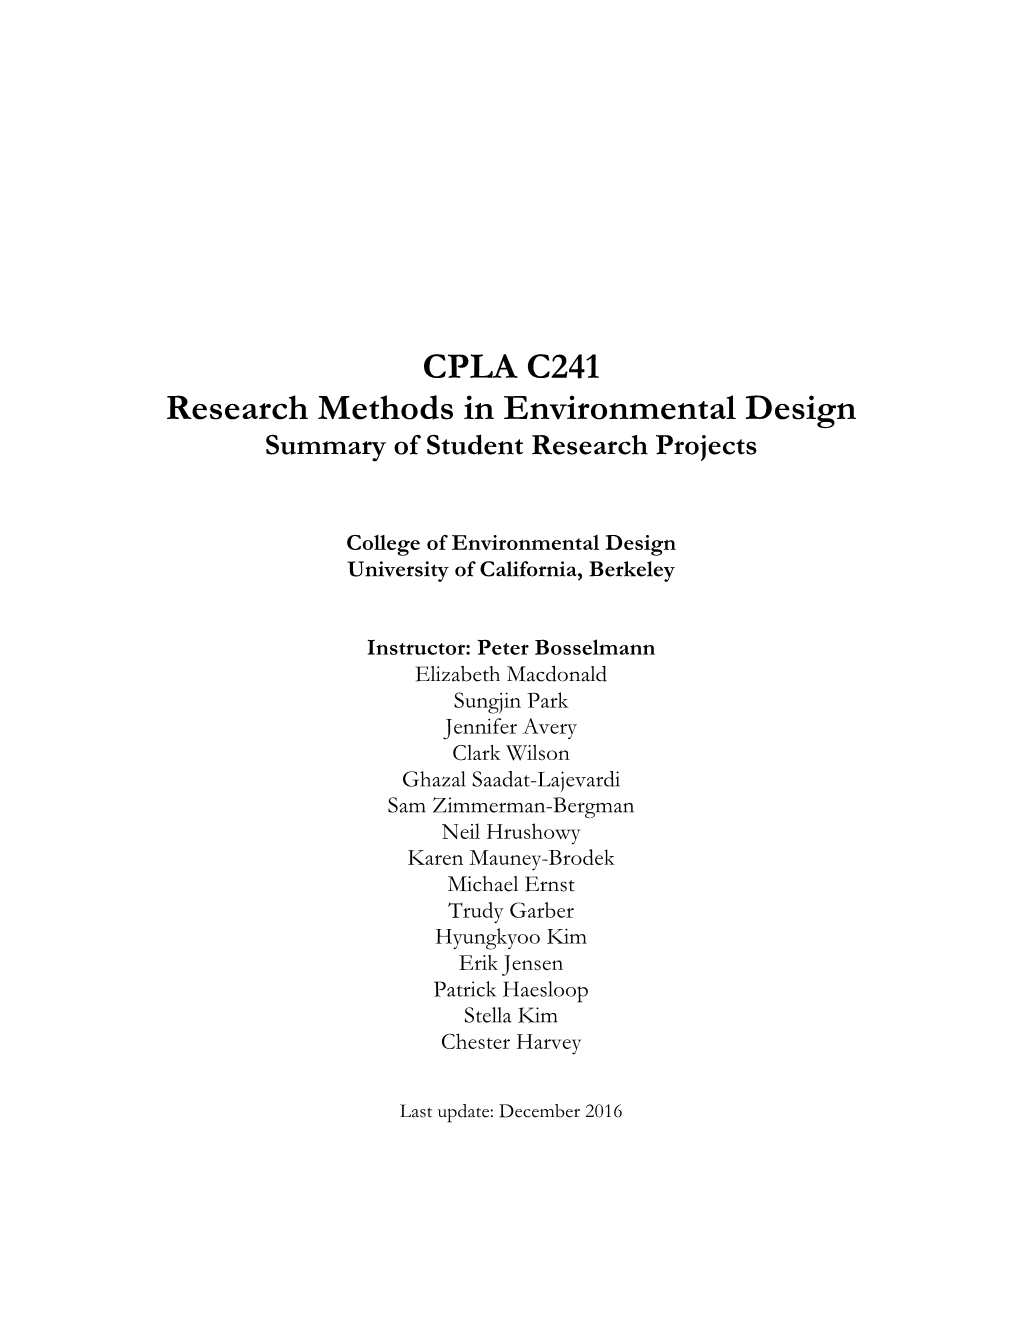 CPLA C241 Research Methods in Environmental Design Summary of Student Research Projects